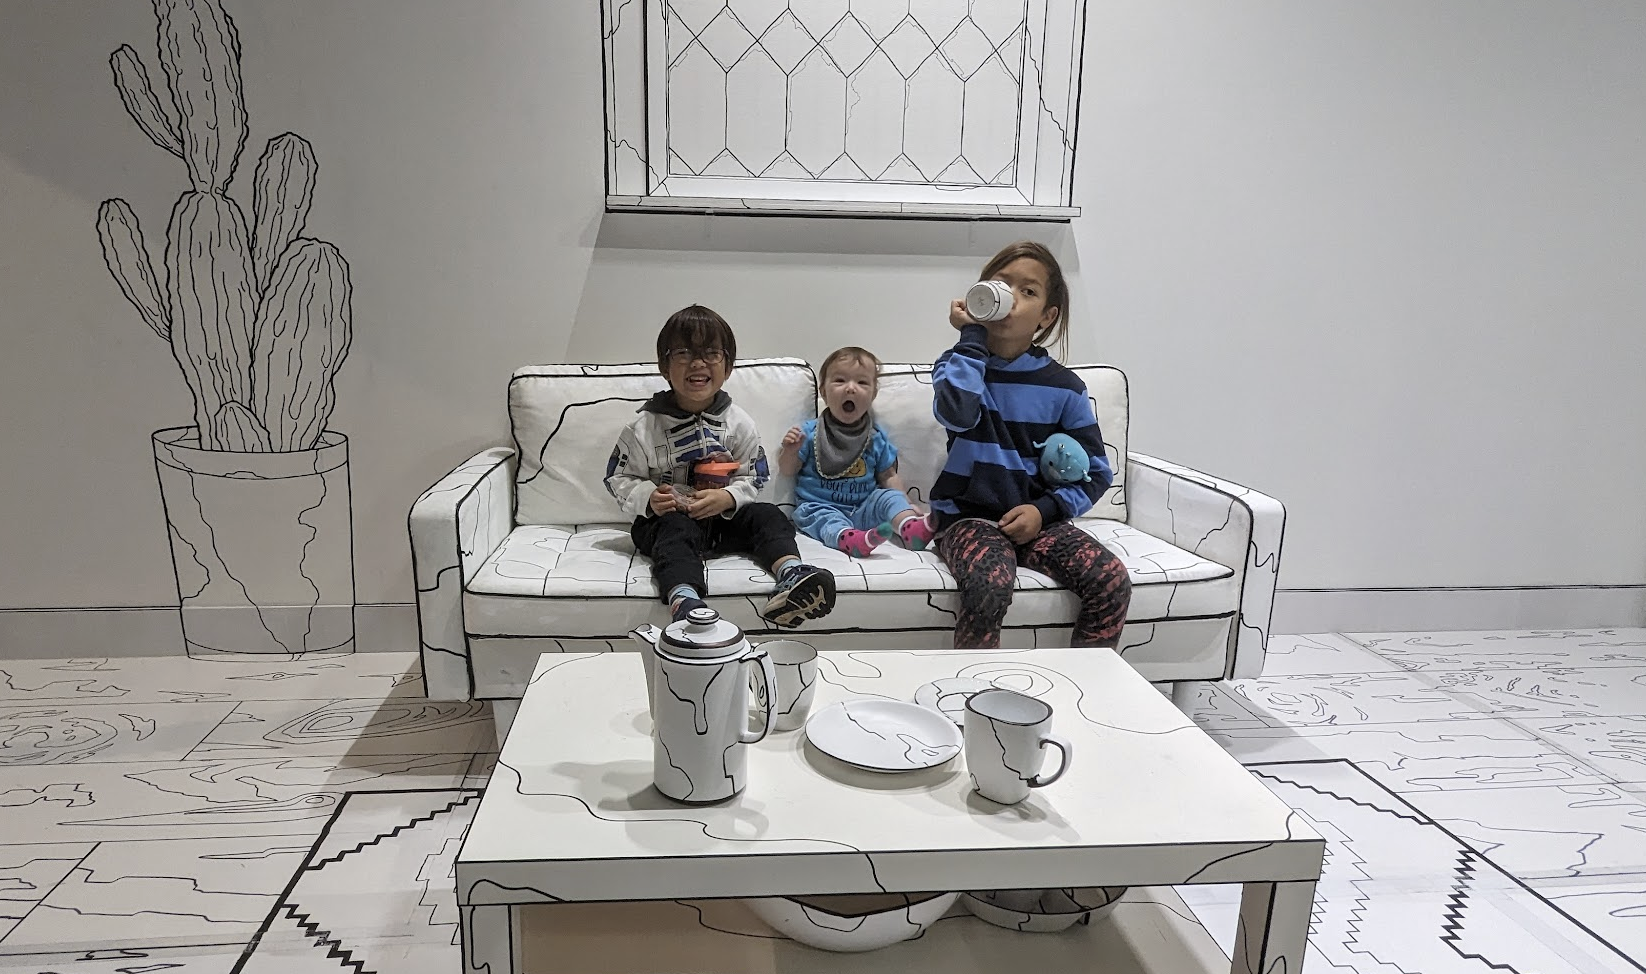 Two boys and one baby girl pose with different silly faces on a white couch with black outlines in a room designed to look like a line illustration on pape